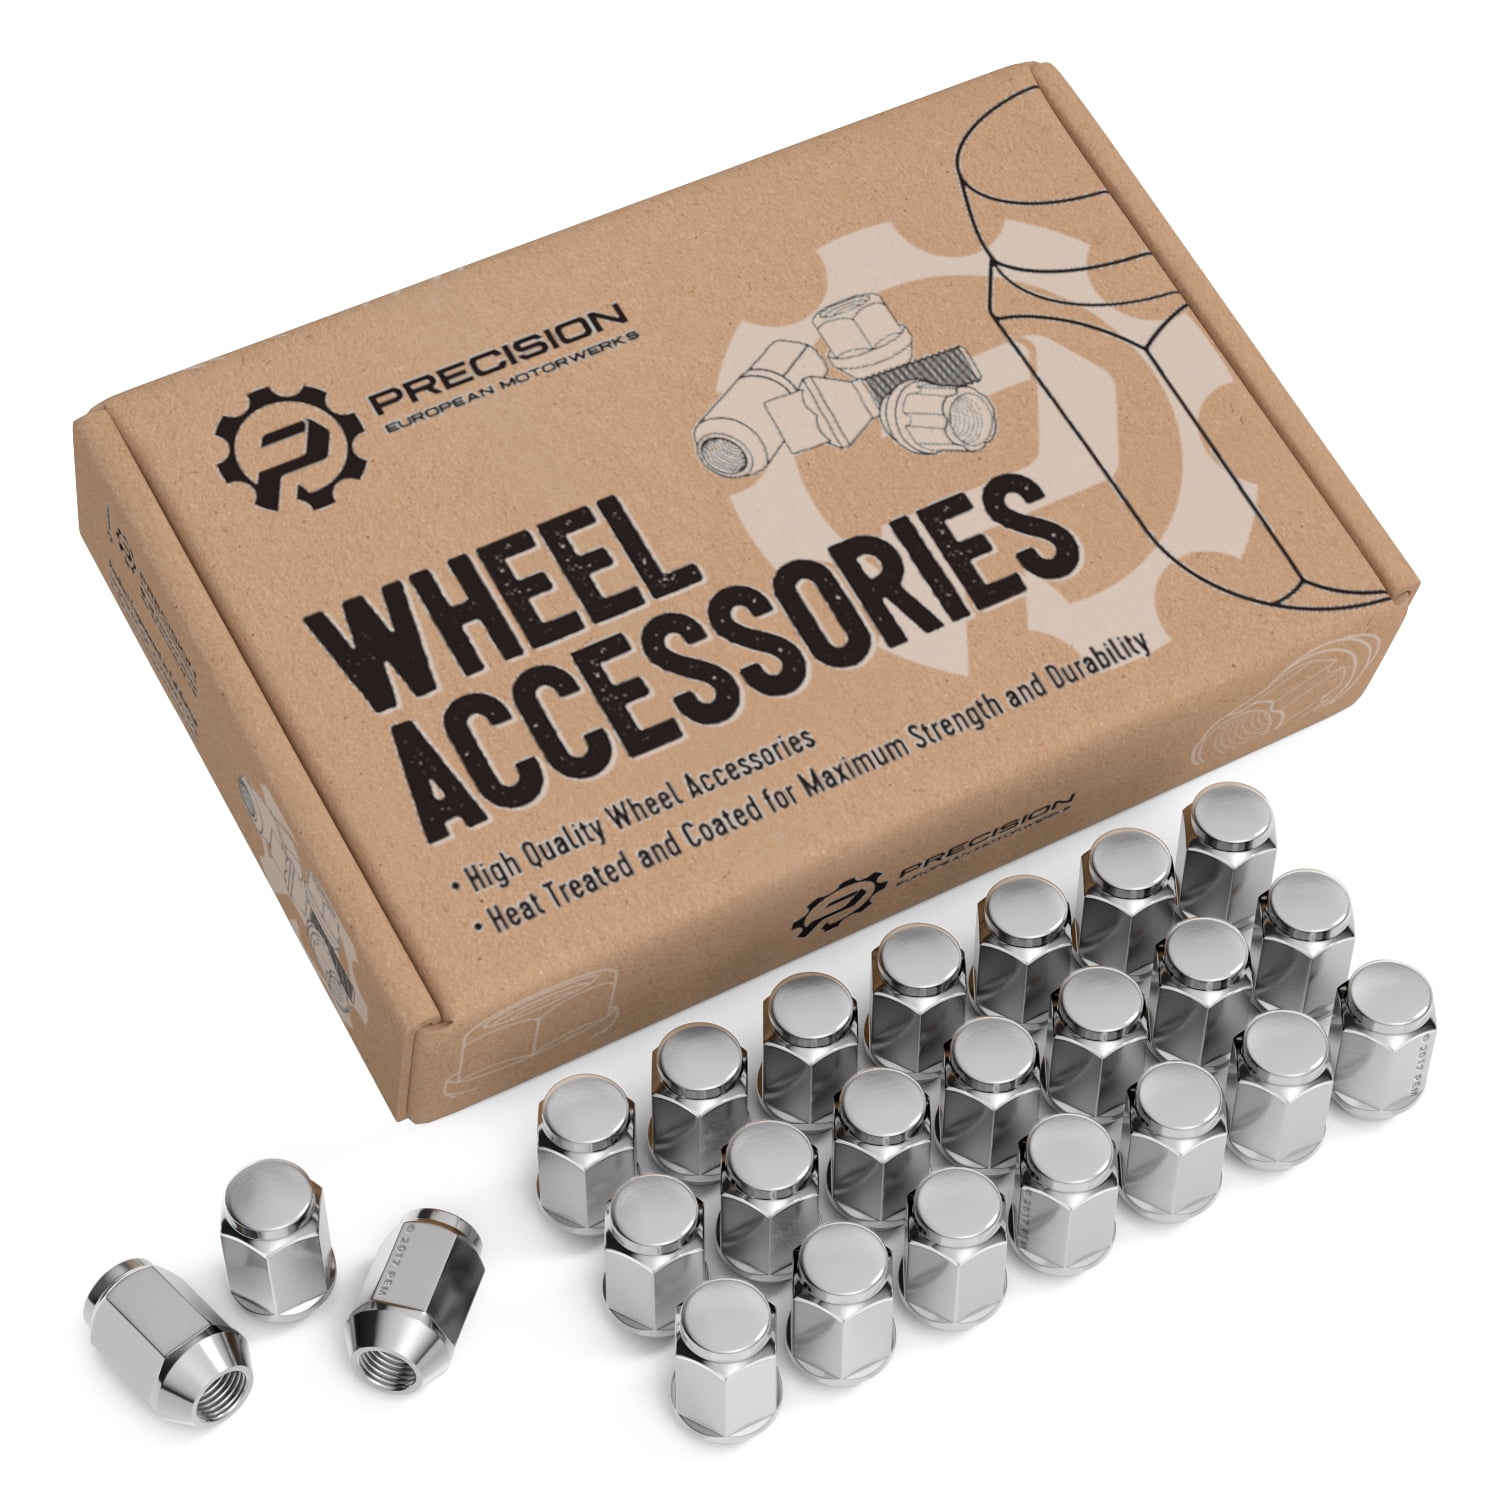 24pcs Chrome Silver Bulge Lug Nuts Closed End ET Style 1/2x20 Threads Compatible with 6Lug Vehicles Wheels Cone Conical Taper Seat Shank 1.75 inch Length